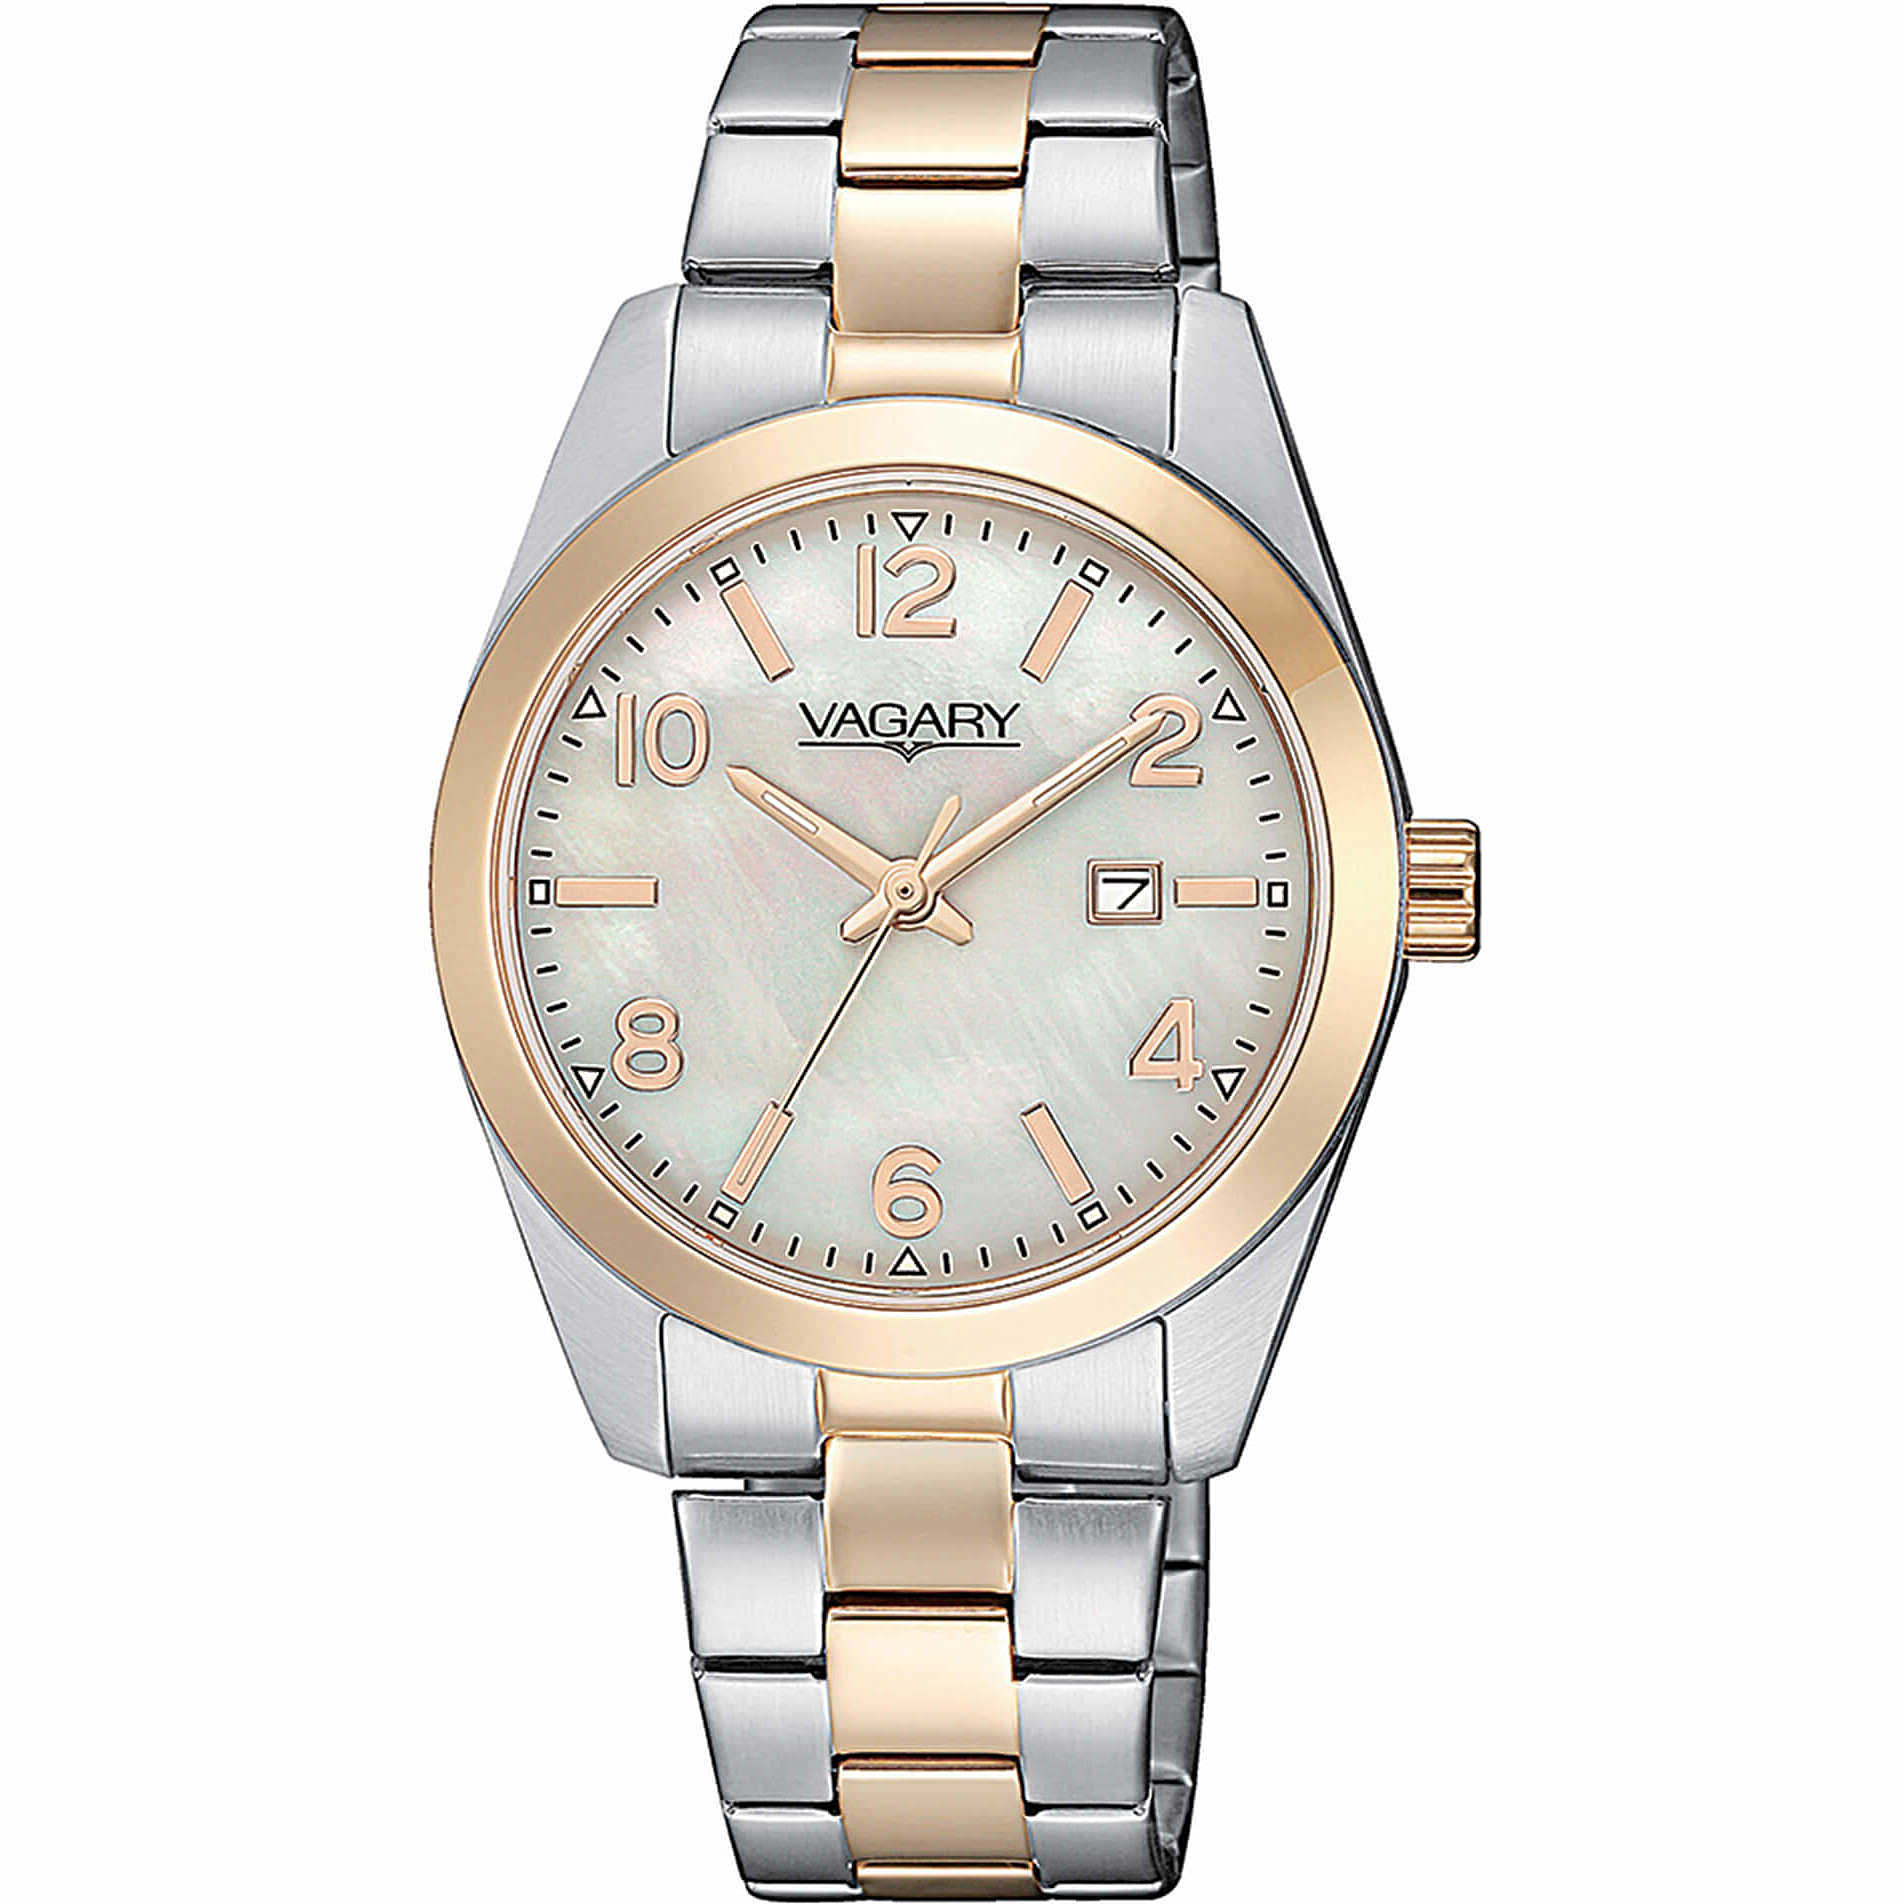 Vagary Watch by Citizen Timeless Lady IU2-731-11